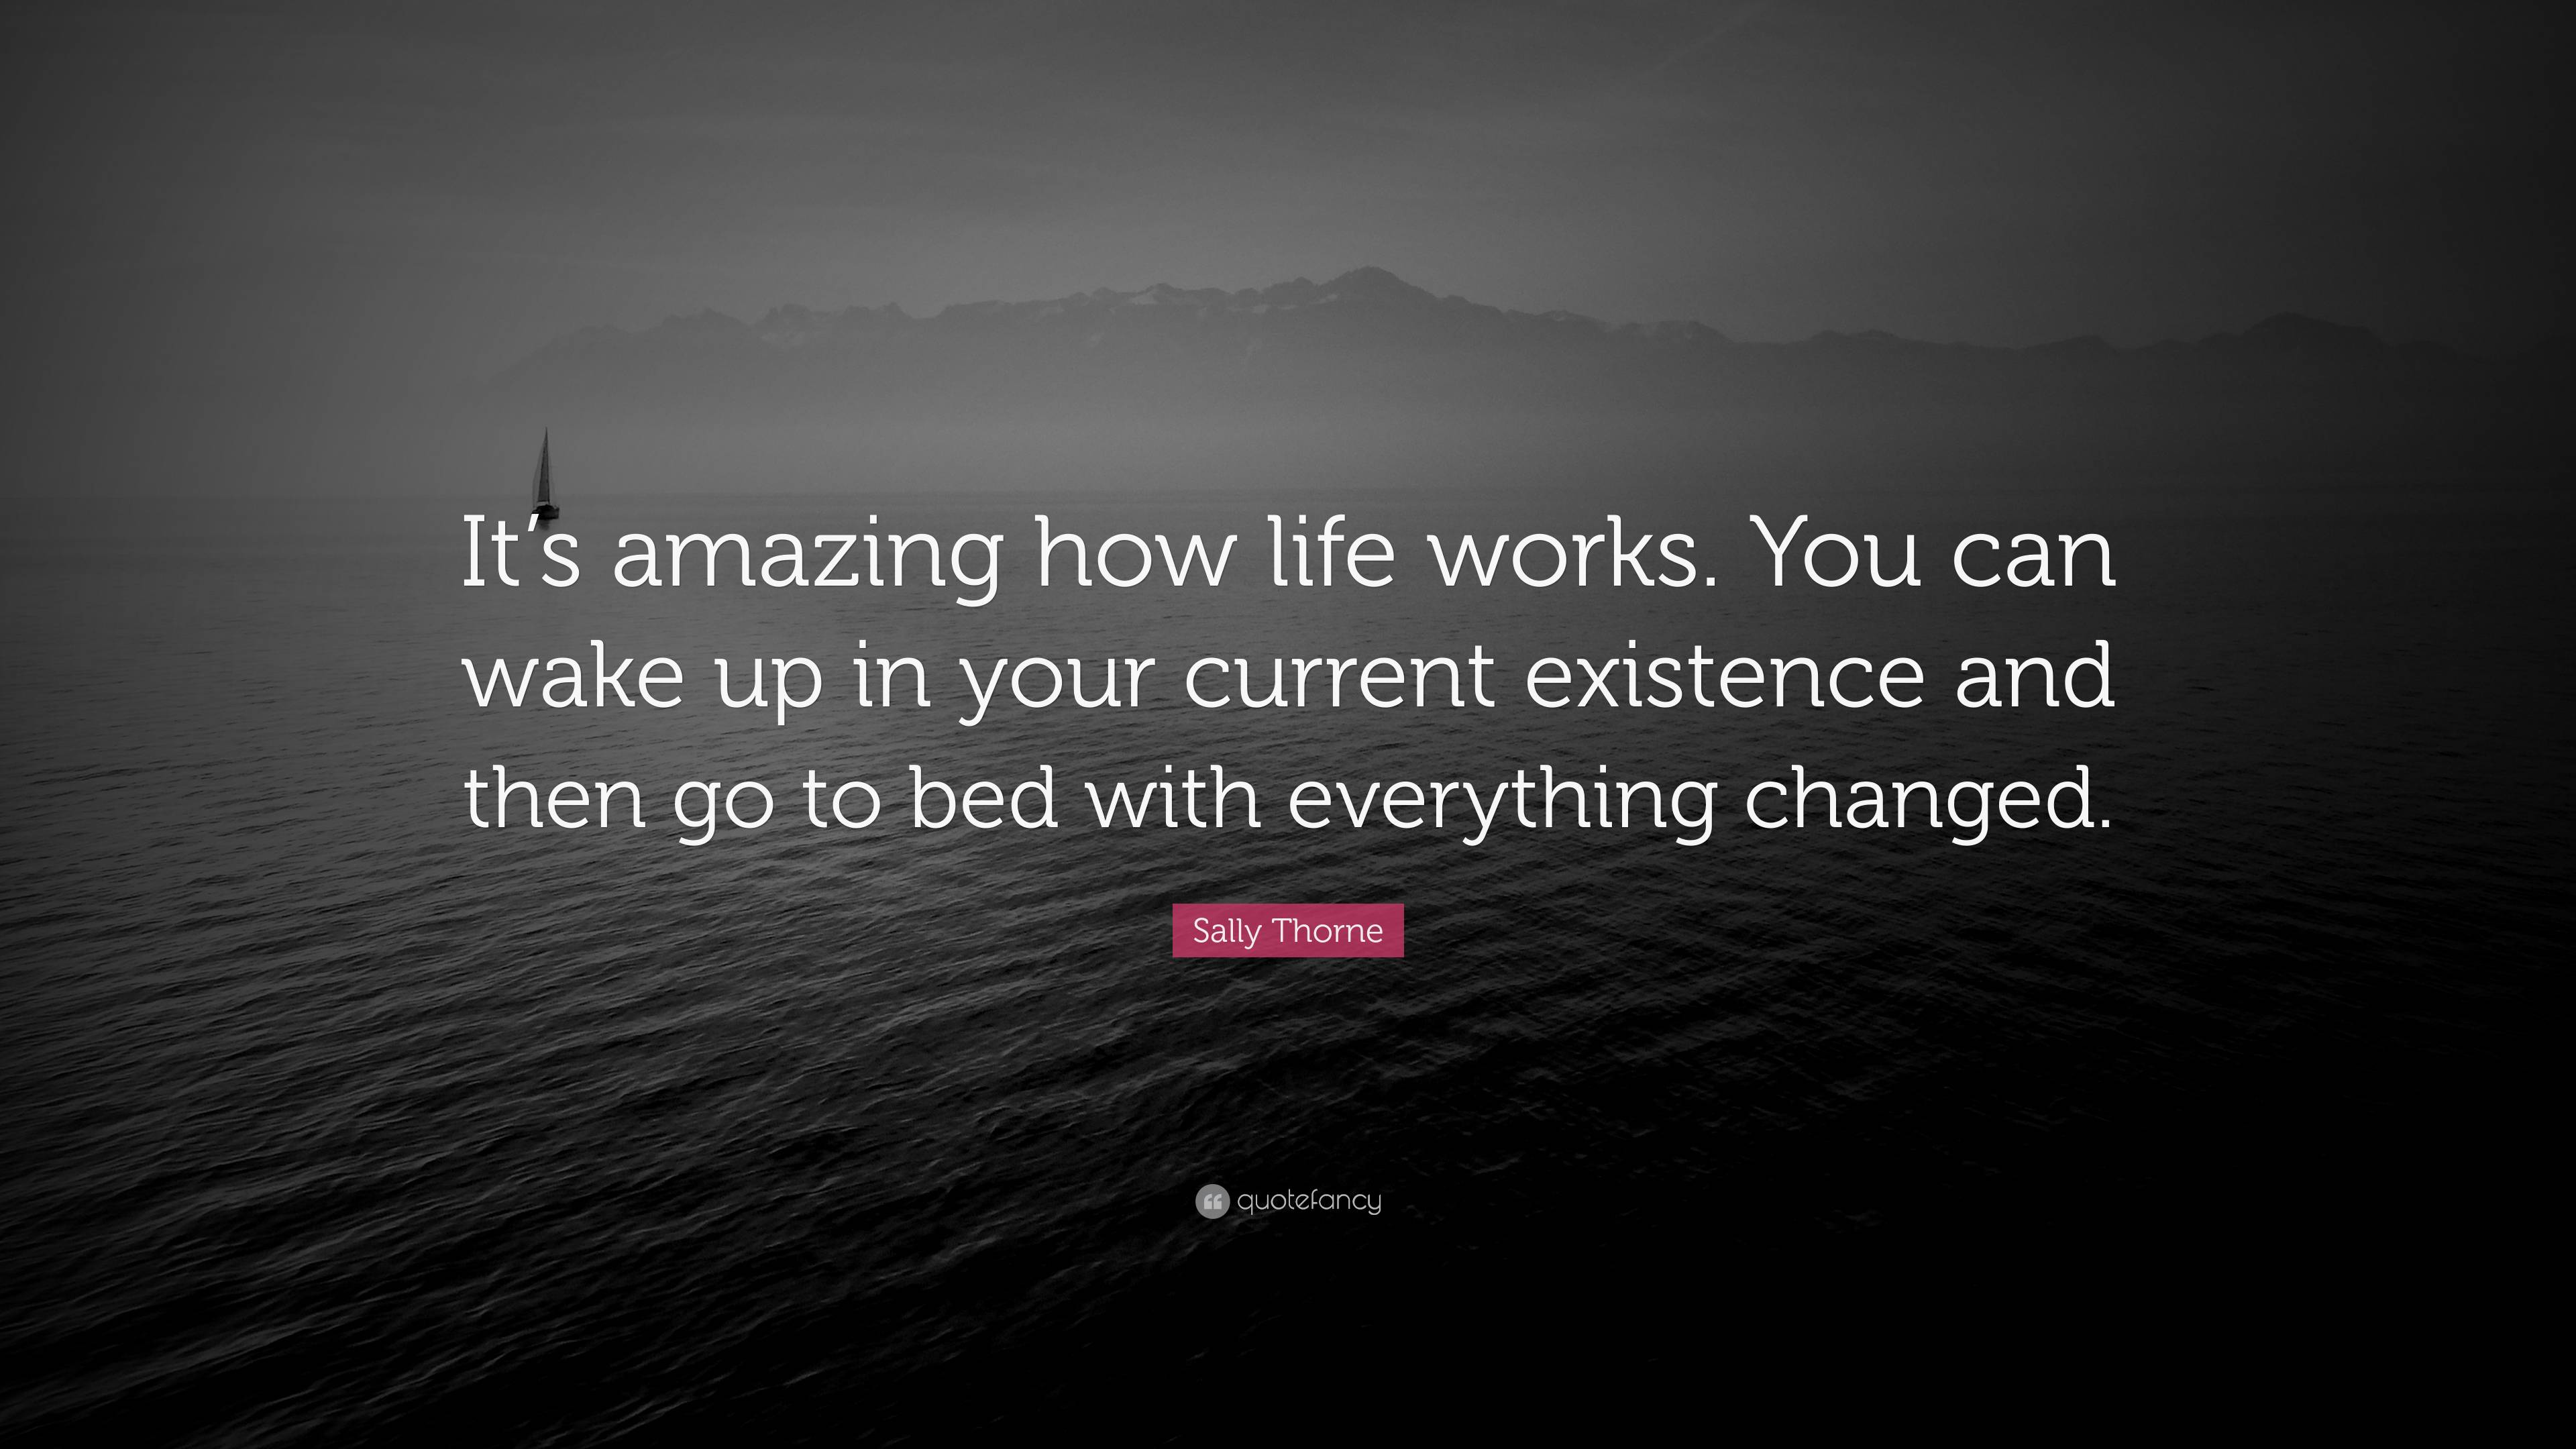 Sally Thorne Quote: “It’s amazing how life works. You can wake up in ...